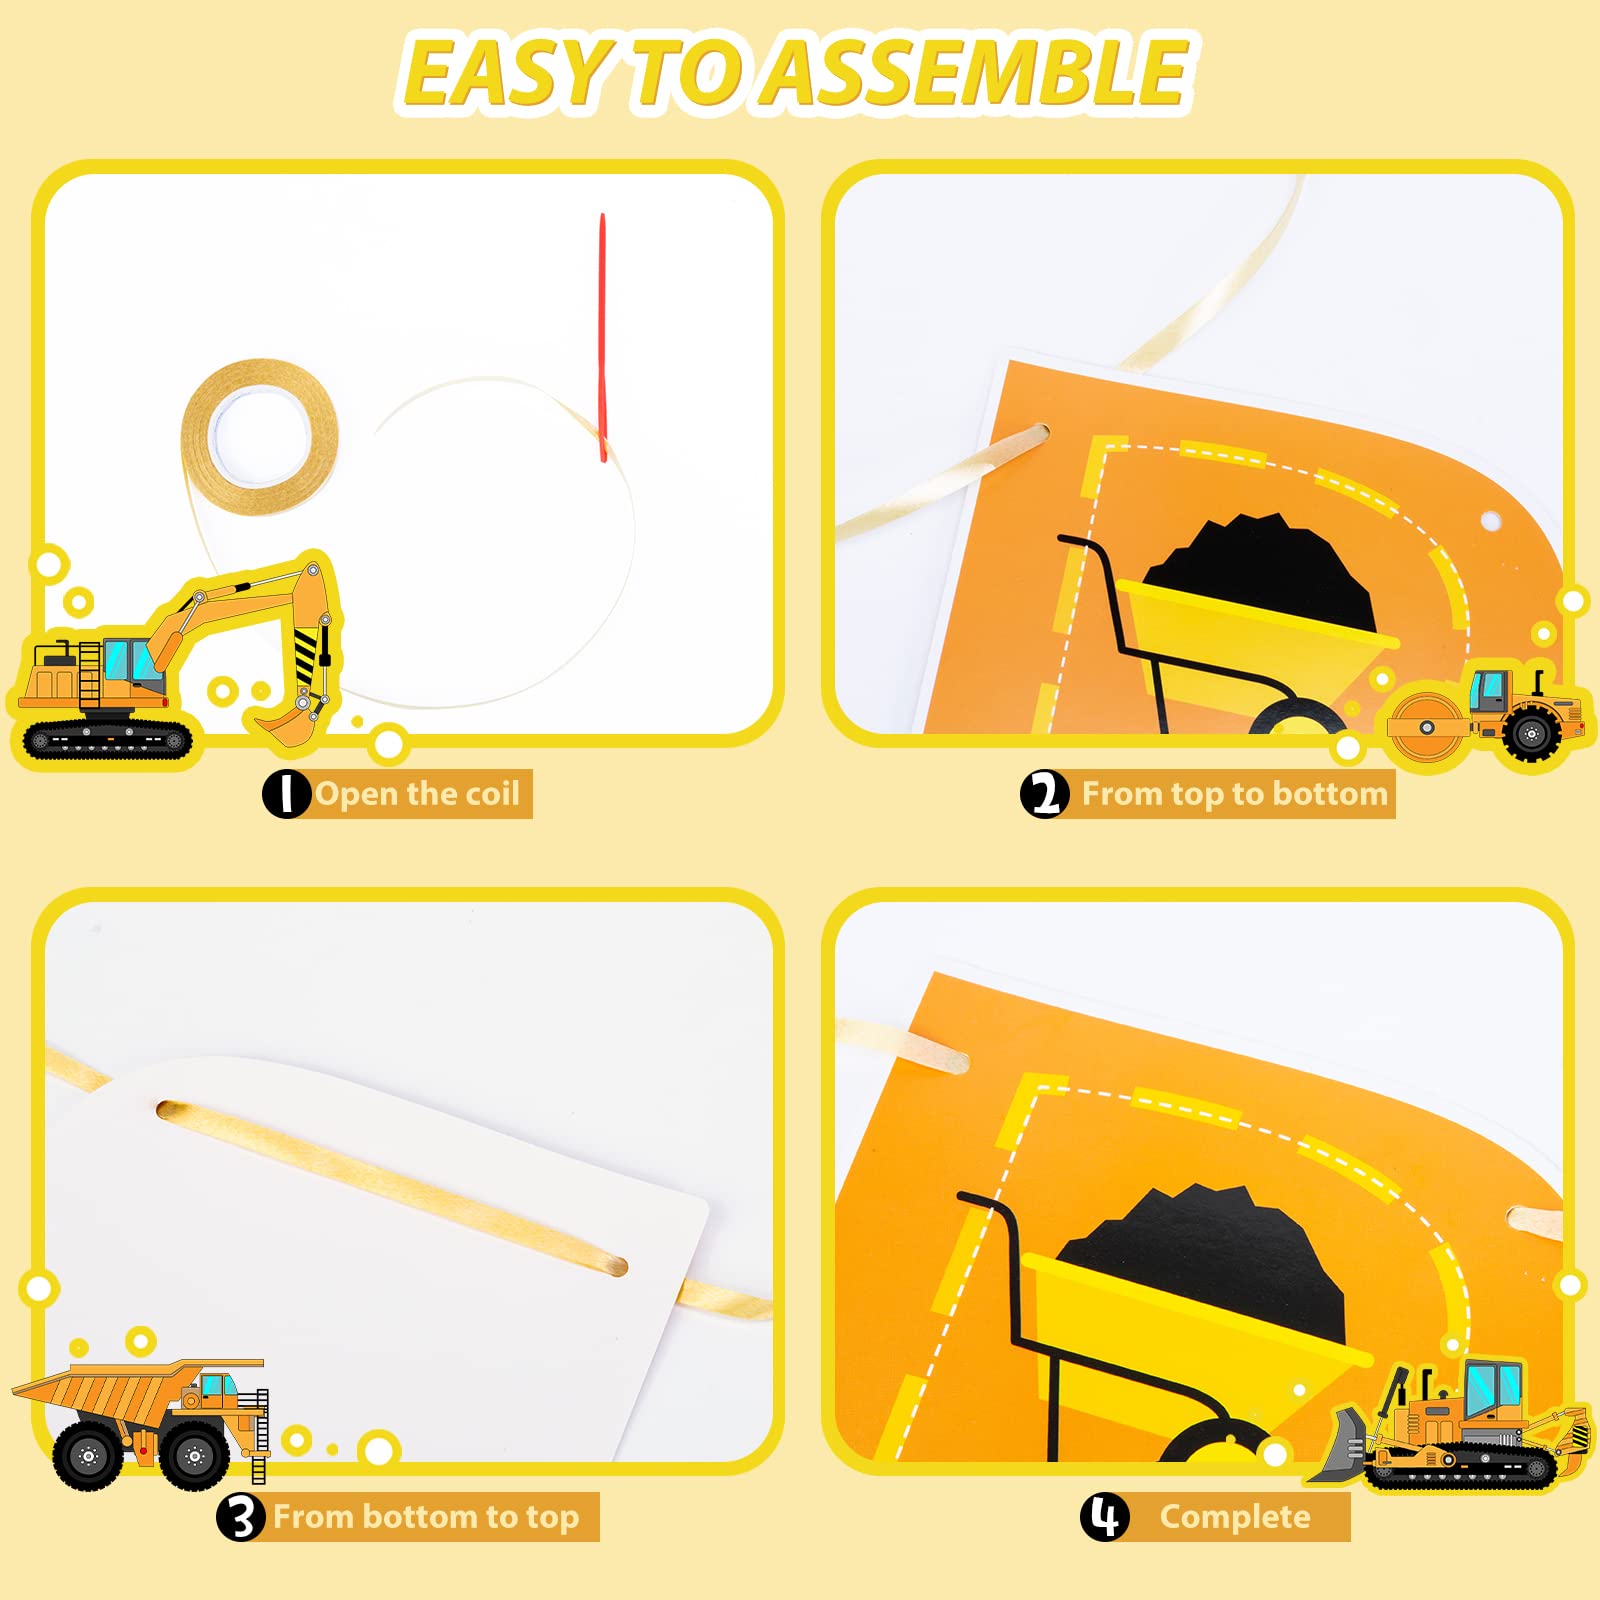 Refasy Birthday Party Decorations for Kids,Dump Truck Party Decorations Kits Construction Birthday Party Supplies Foil Balloons,Banner,Cake Toppers for 3 Year Olds Birthday Party